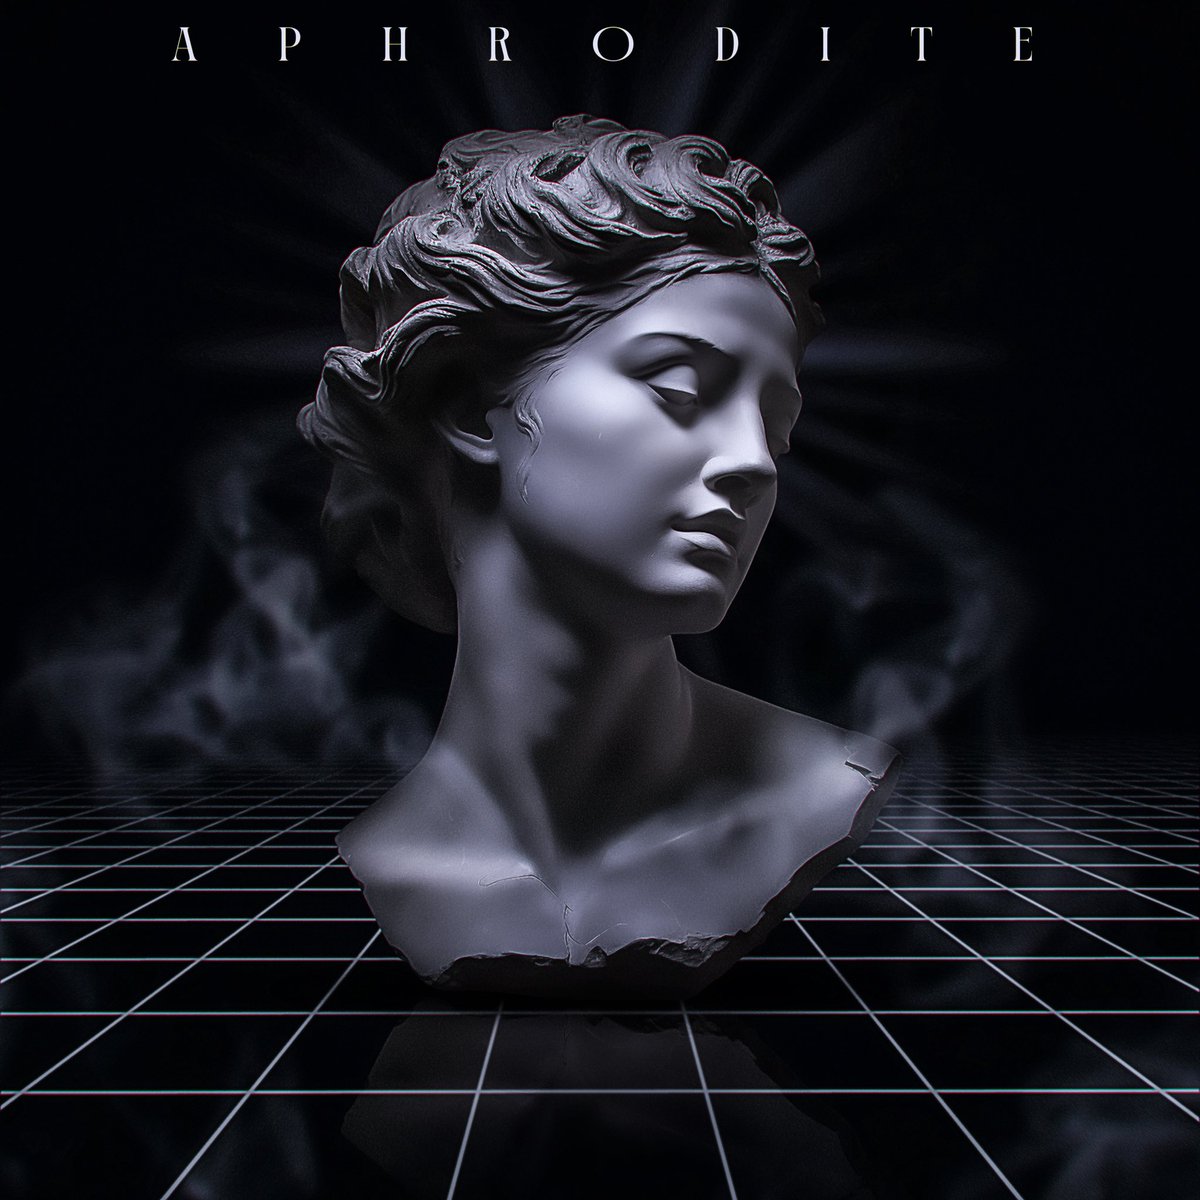 We hope you all enjoyed our newest single APHRODITE out now everywhere! Stay tuned for the world premiere of the official music video today at 10AM PST and chat with us live during the premiere on Aztec Records YouTube page!